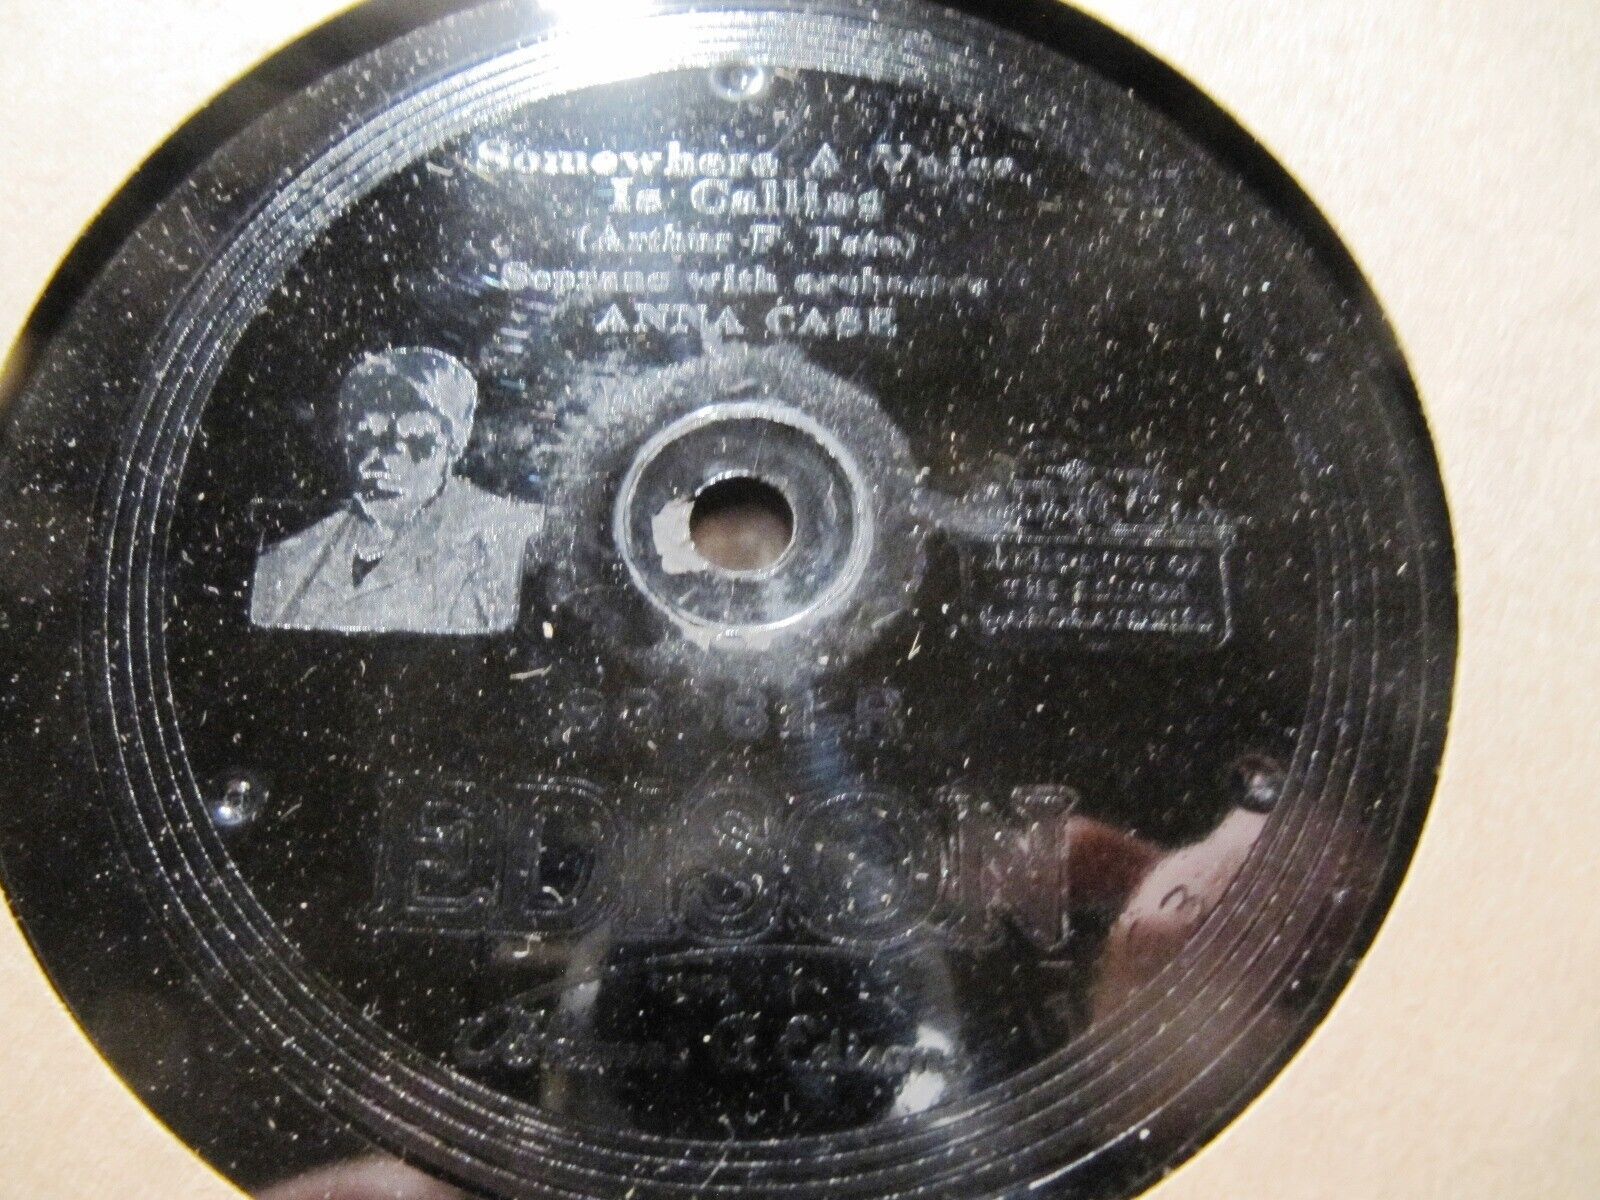 1917 ANNA CASE McCormack's SOMEWHERE A VOICE IS CALLING EDISON DD 83084 78 x